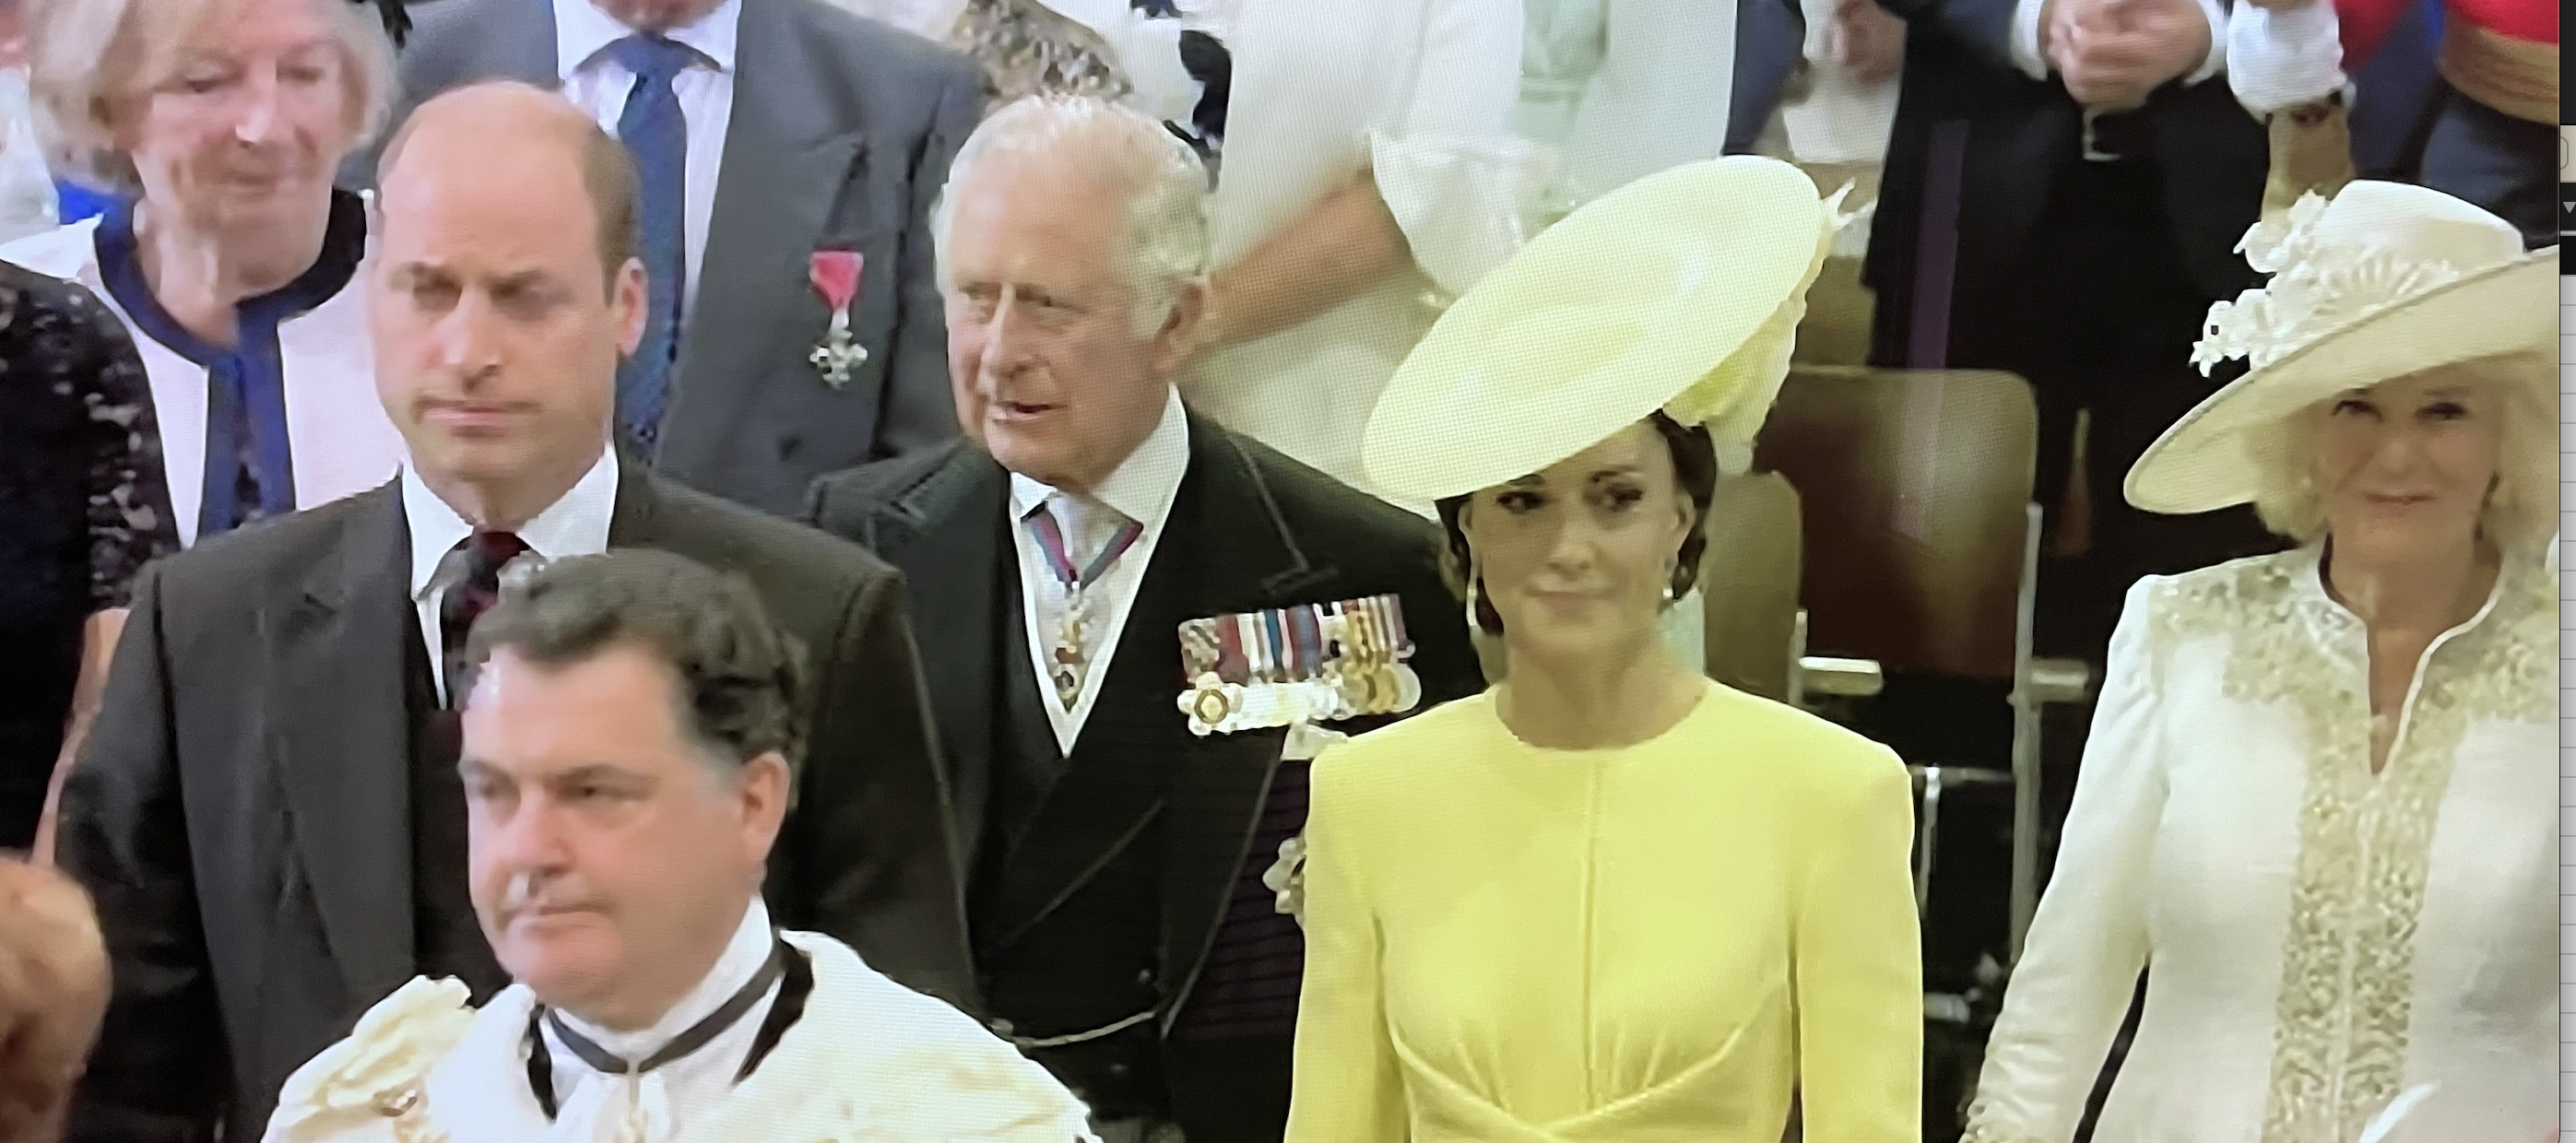 Prince William, Prince Charles, Kate and Camilla inside St Paul's Catherdral for the Thanksgiving Service.